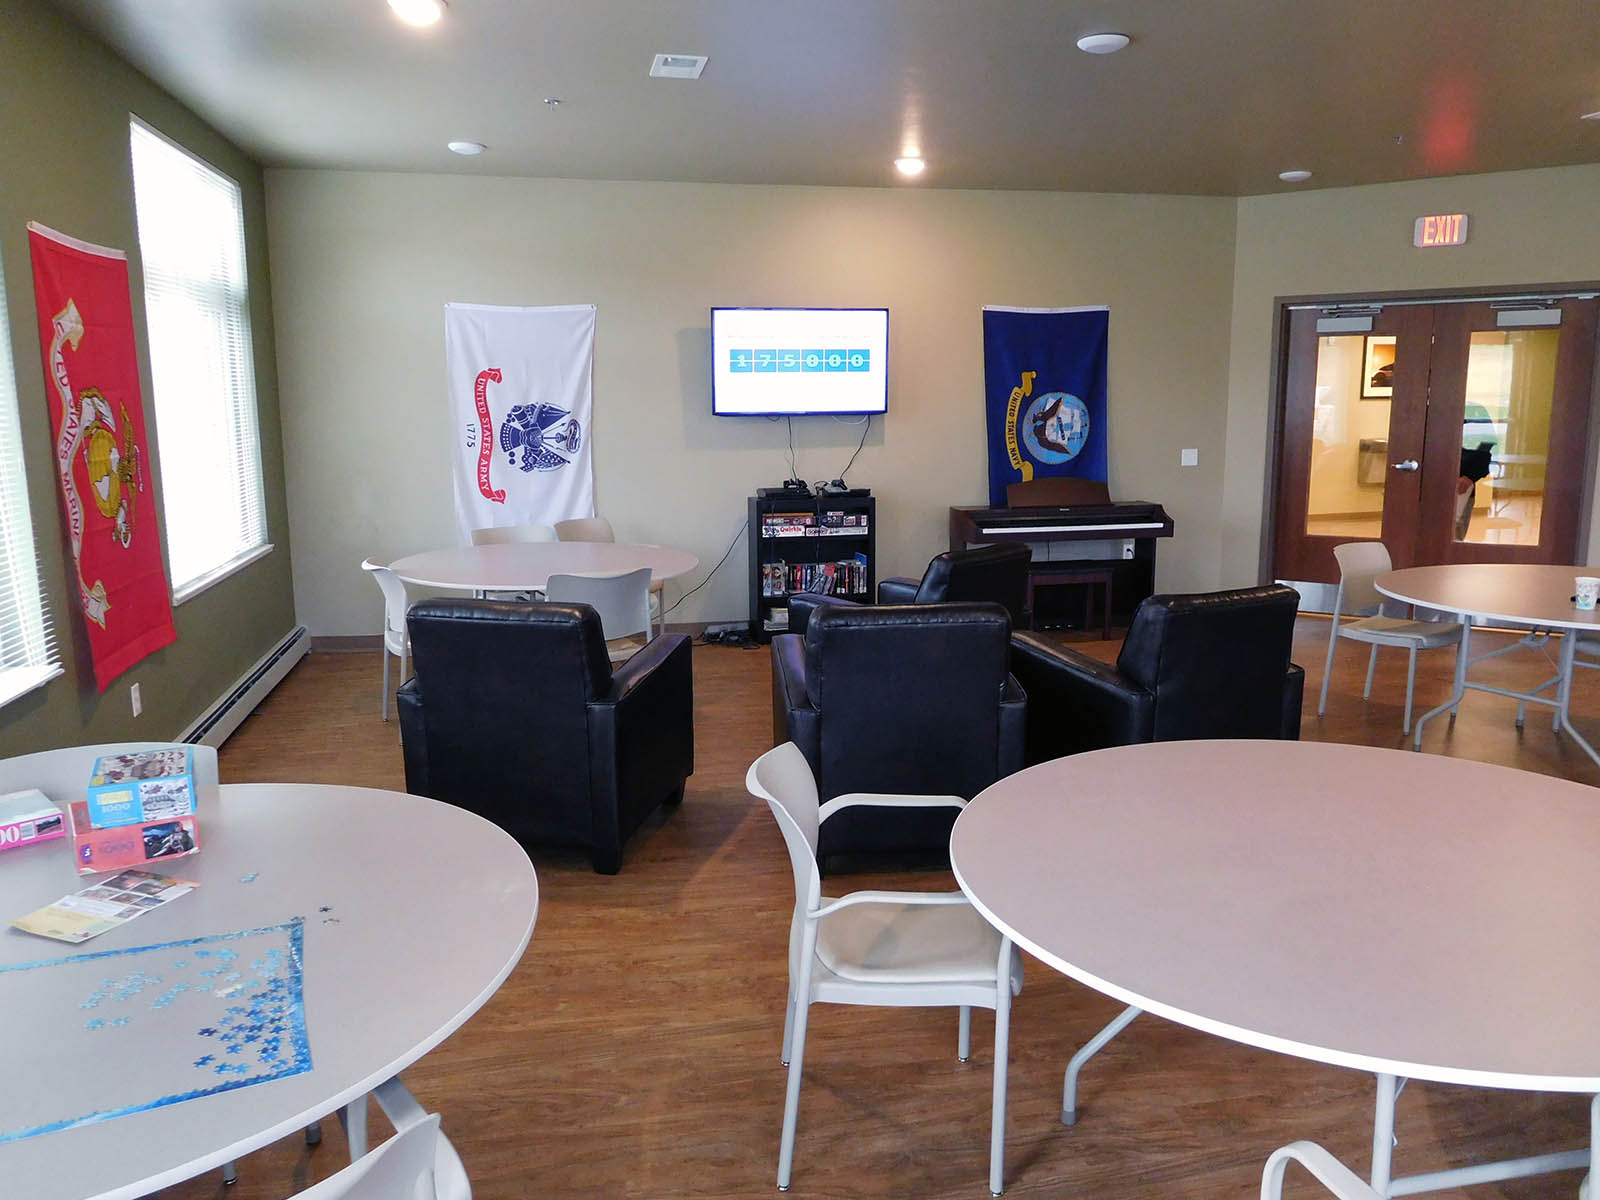 community room with TV, video games, movies, piano, lounging area and tables and chairs for sitting